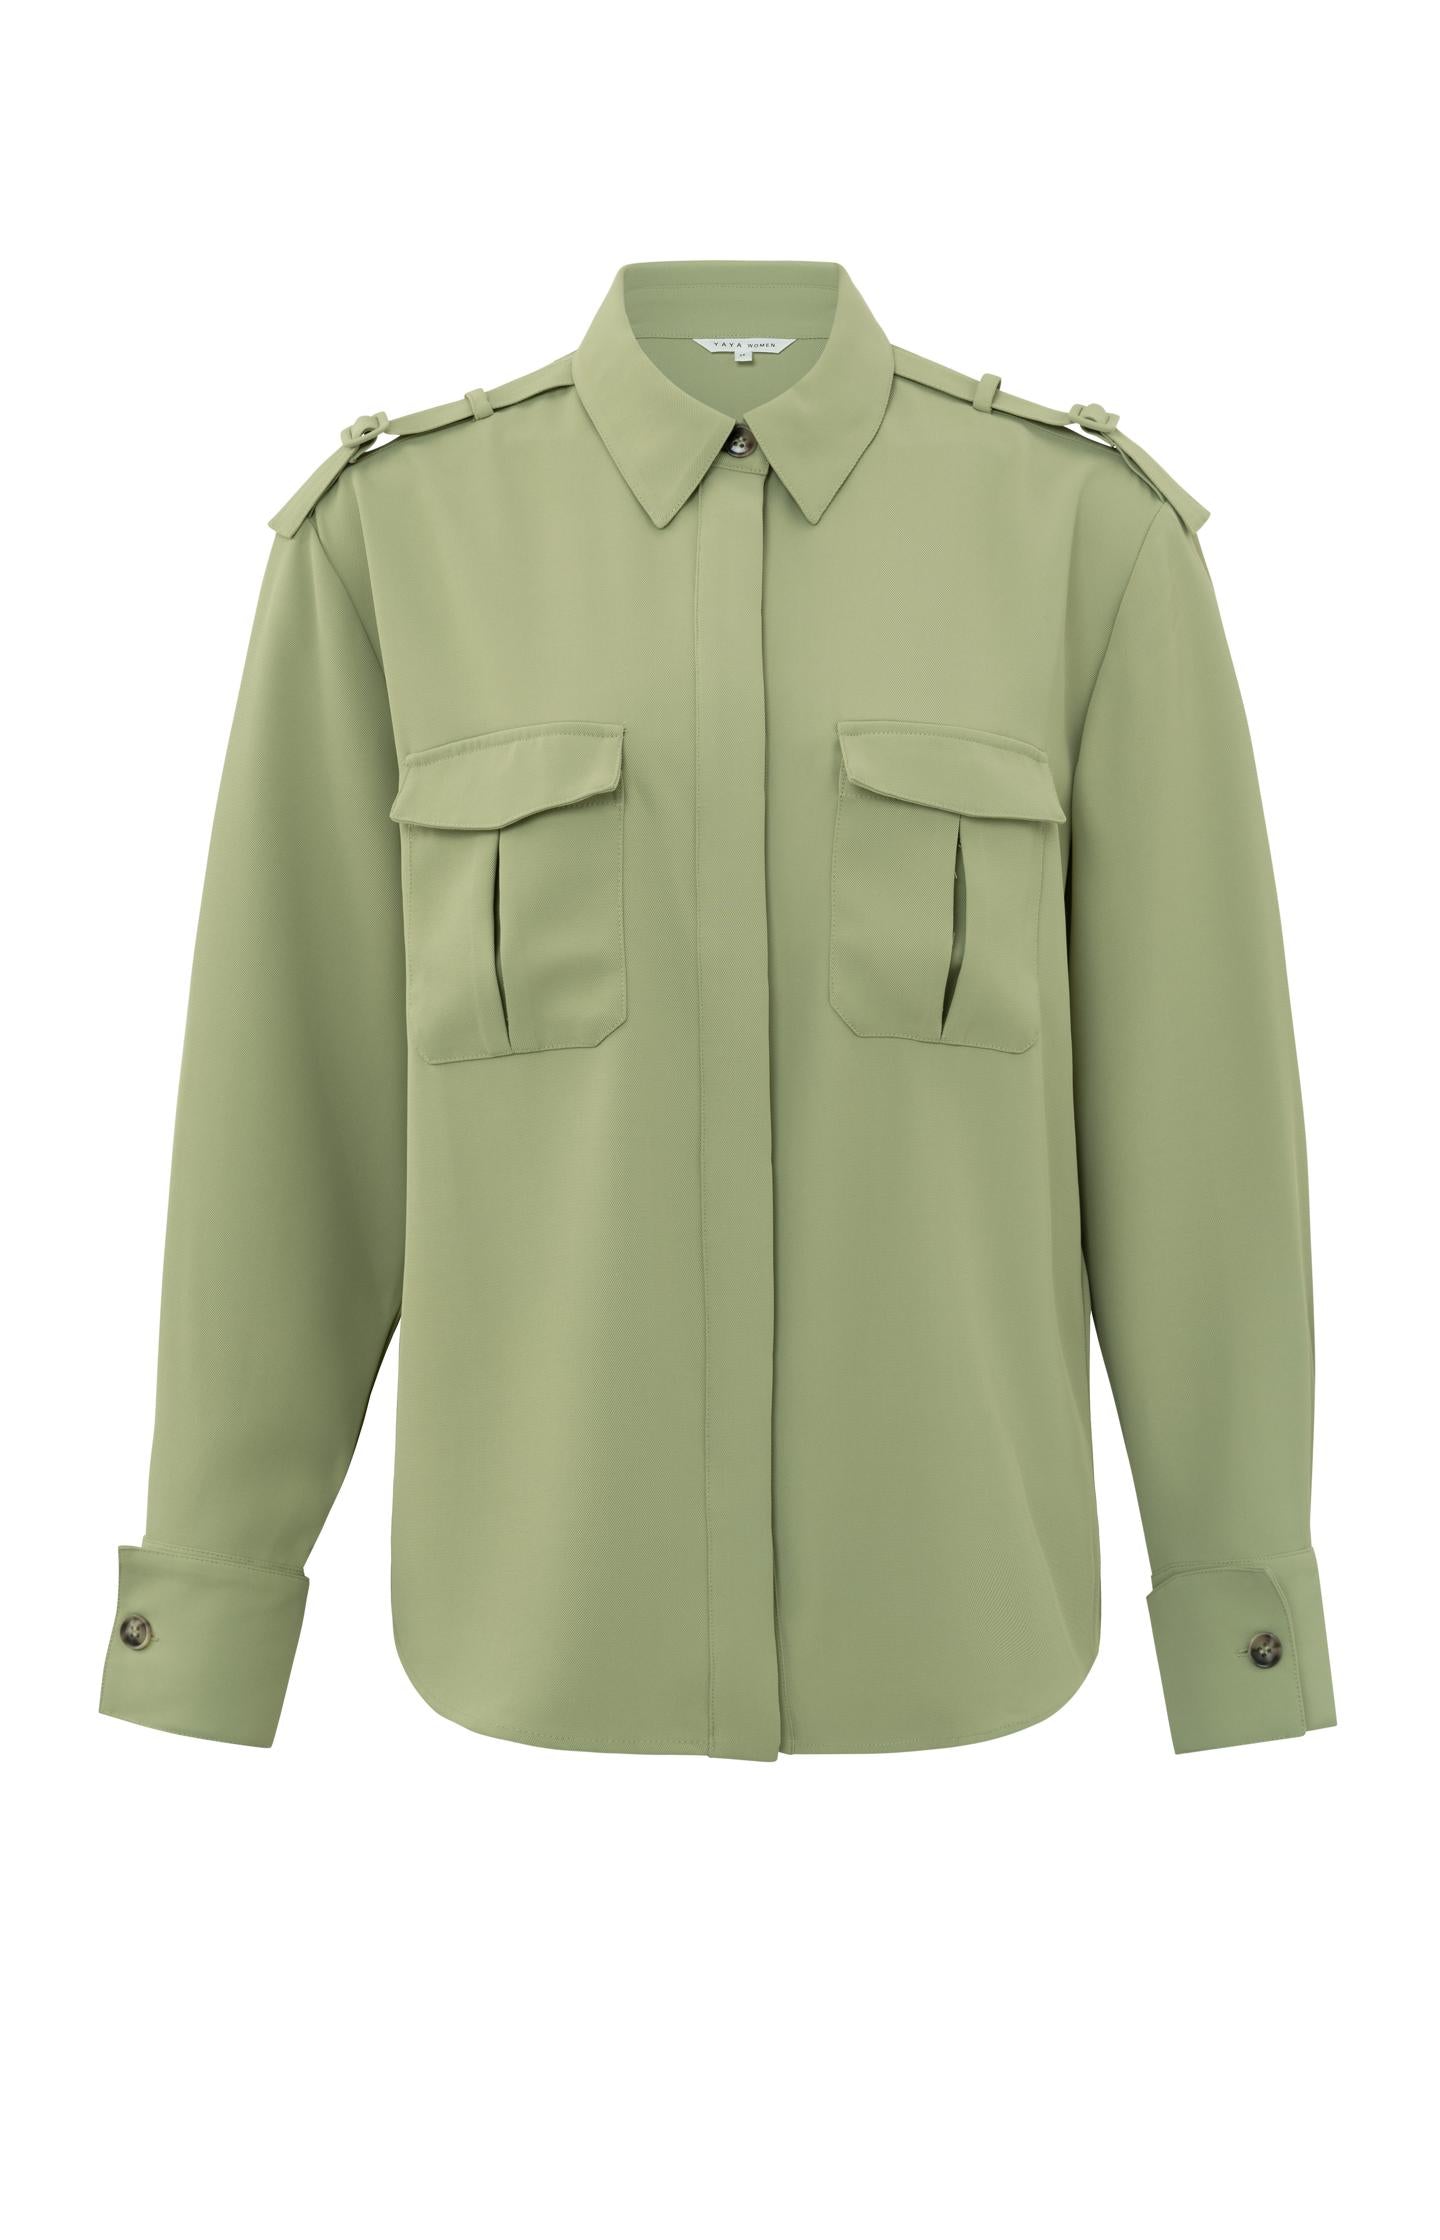 Cargo blouse with collar, long sleeves, buttons and pockets - Sage Green - Type: product